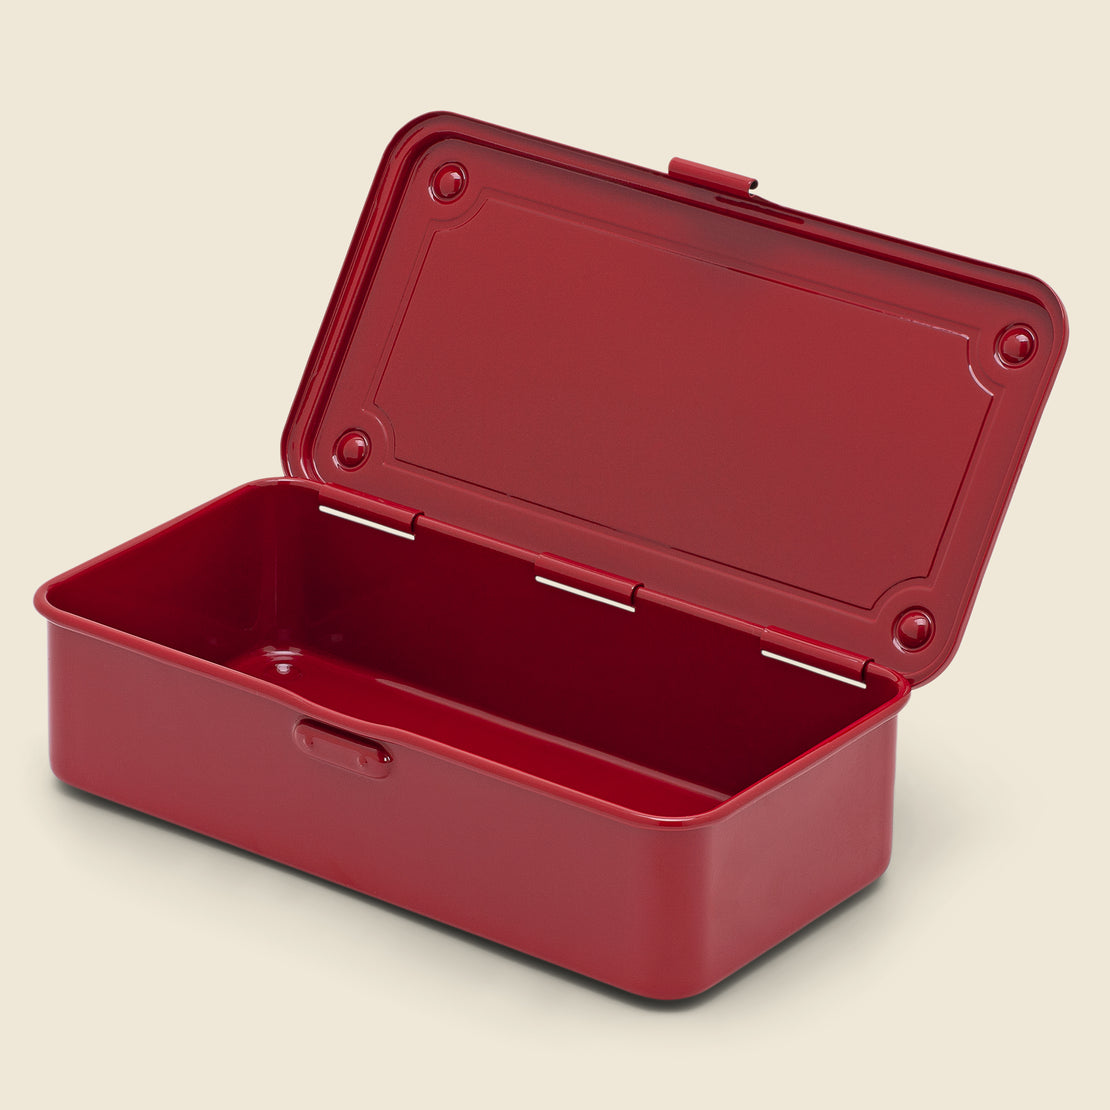 Stackable Storage Box - Red - Home - STAG Provisions - Home - Kitchen - Storage